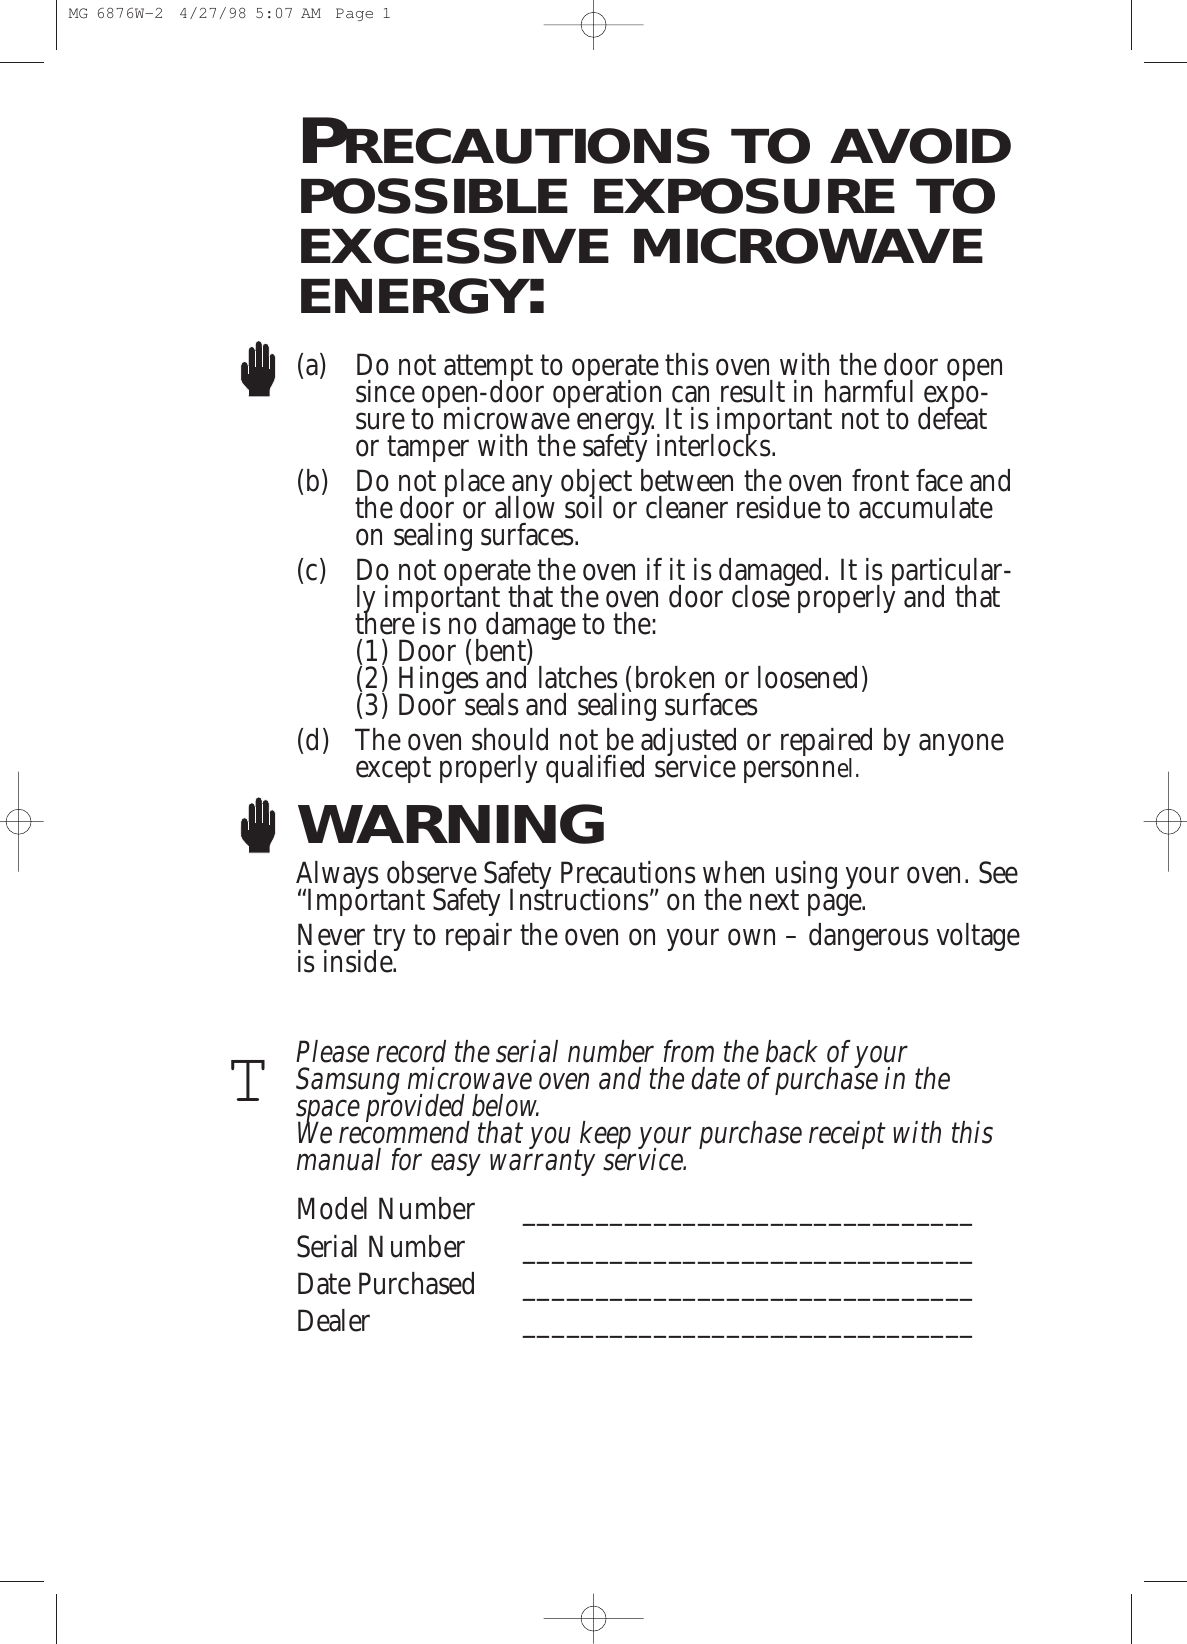 PRECAUTIONS TO AVOIDPOSSIBLE EXPOSURE TOEXCESSIVE MICROWAVEENERGY:(a) Do not attempt to operate this oven with the door opensince open-door operation can result in harmful expo-sure to microwave energy. It is important not to defeator tamper with the safety interlocks.(b) Do not place any object between the oven front face andthe door or allow soil or cleaner residue to accumulateon sealing surfaces.(c) Do not operate the oven if it is damaged. It is particular-ly important that the oven door close properly and thatthere is no damage to the:(1) Door (bent)(2) Hinges and latches (broken or loosened)(3) Door seals and sealing surfaces(d) The oven should not be adjusted or repaired by anyoneexcept properly qualified service personnel.WARNINGAlways observe Safety Precautions when using your oven. See“Important Safety Instructions” on the next page.Never try to repair the oven on your own – dangerous voltageis inside. Please record the serial number from the back of yourSamsung microwave oven and the date of purchase in thespace provided below. We recommend that you keep your purchase receipt with thismanual for easy warranty service. Model Number _______________________________Serial Number _______________________________Date Purchased _______________________________Dealer _______________________________TMG 6876W-2  4/27/98 5:07 AM  Page 1